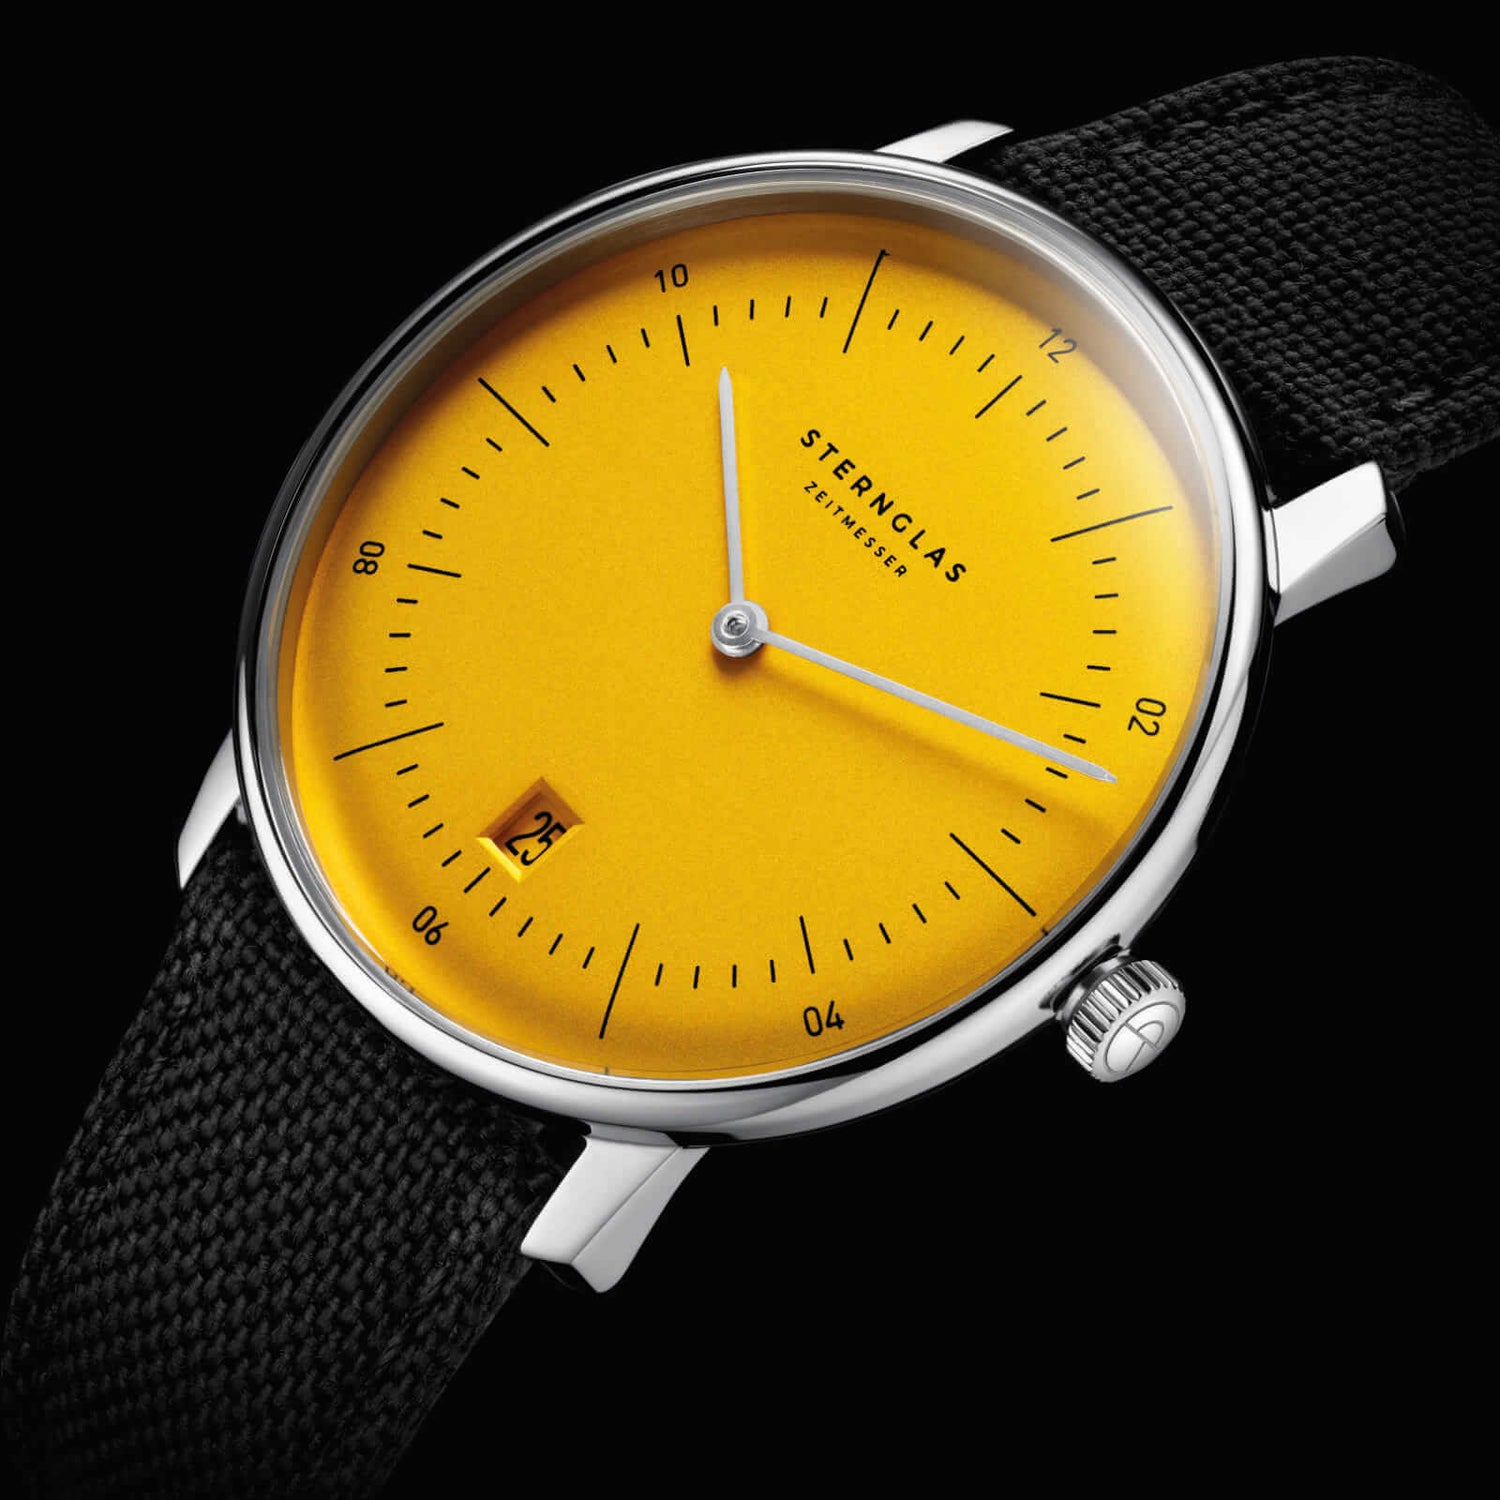 popup|Yellow, domed dial|Grey hands and a framed date together with the satin-finish dial round off the reduced overall appearance